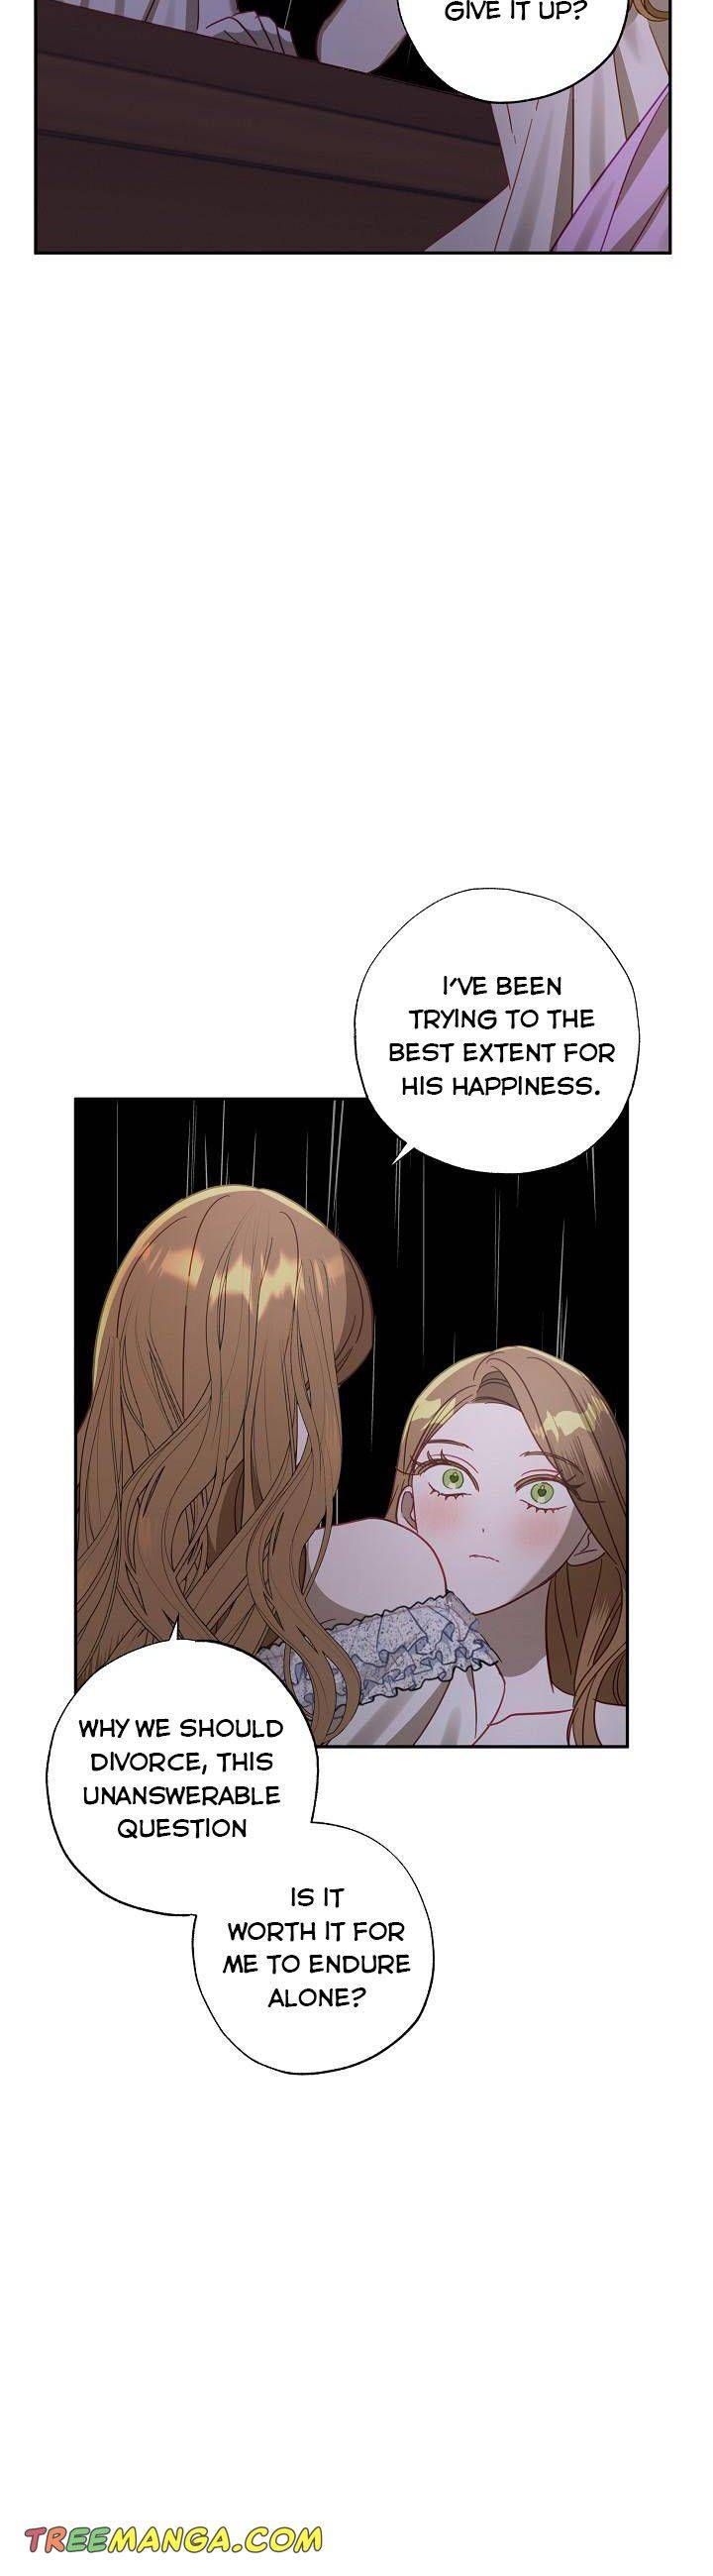 I am Afraid I have Failed to Divorce Chapter 46 page 32